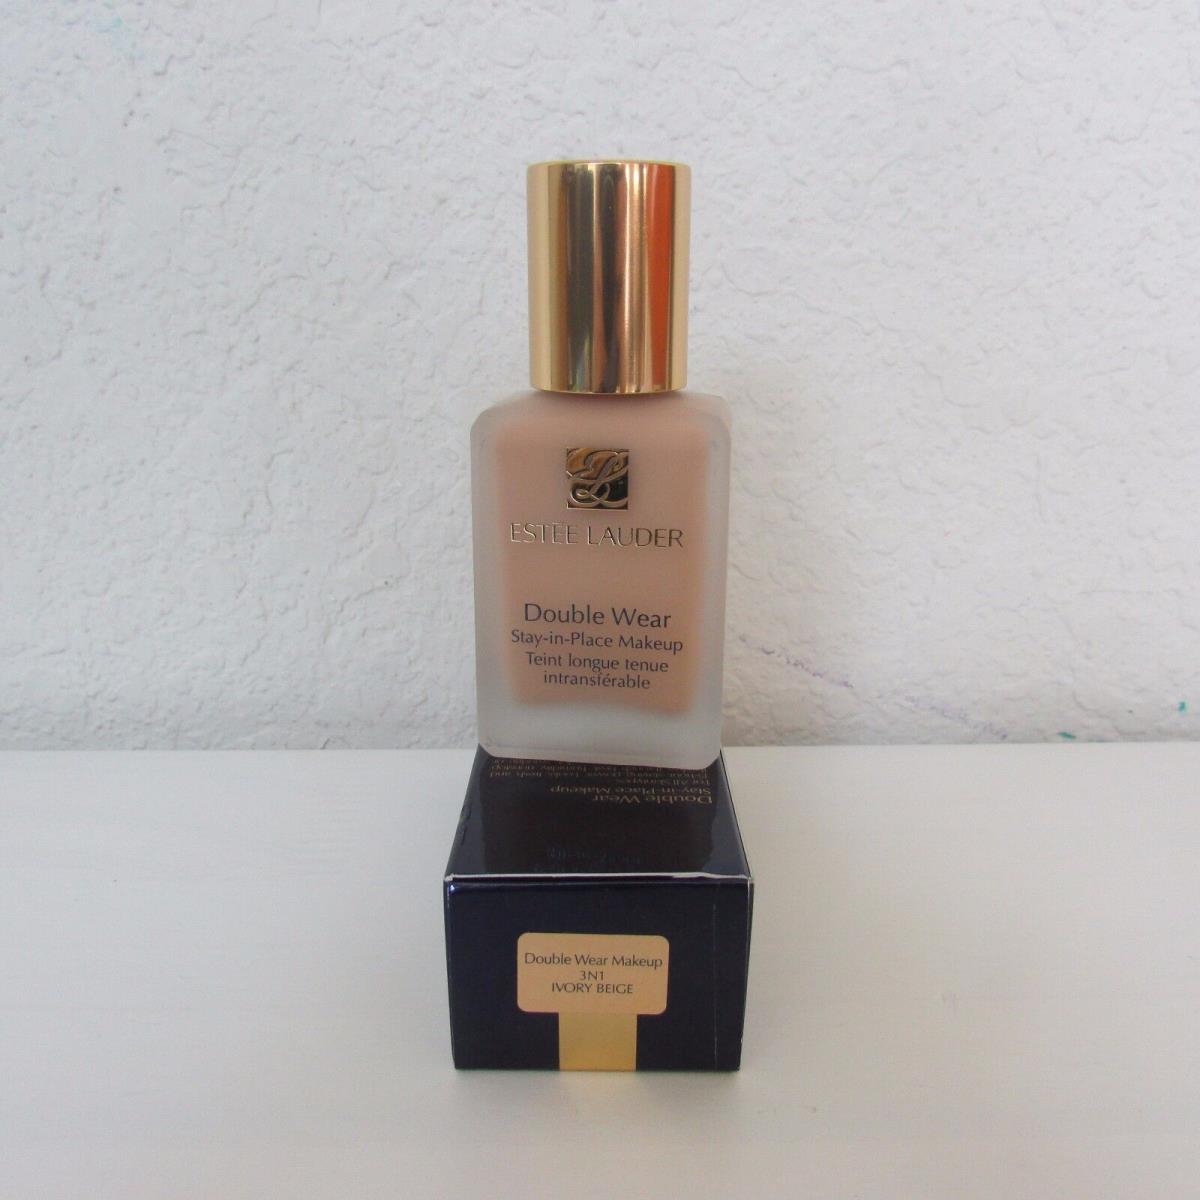 Estee Lauder Double Wear Stay-in-place Makeup Choose Your Shade 1.0 Oz/30 ml 3N1 Ivory Beige